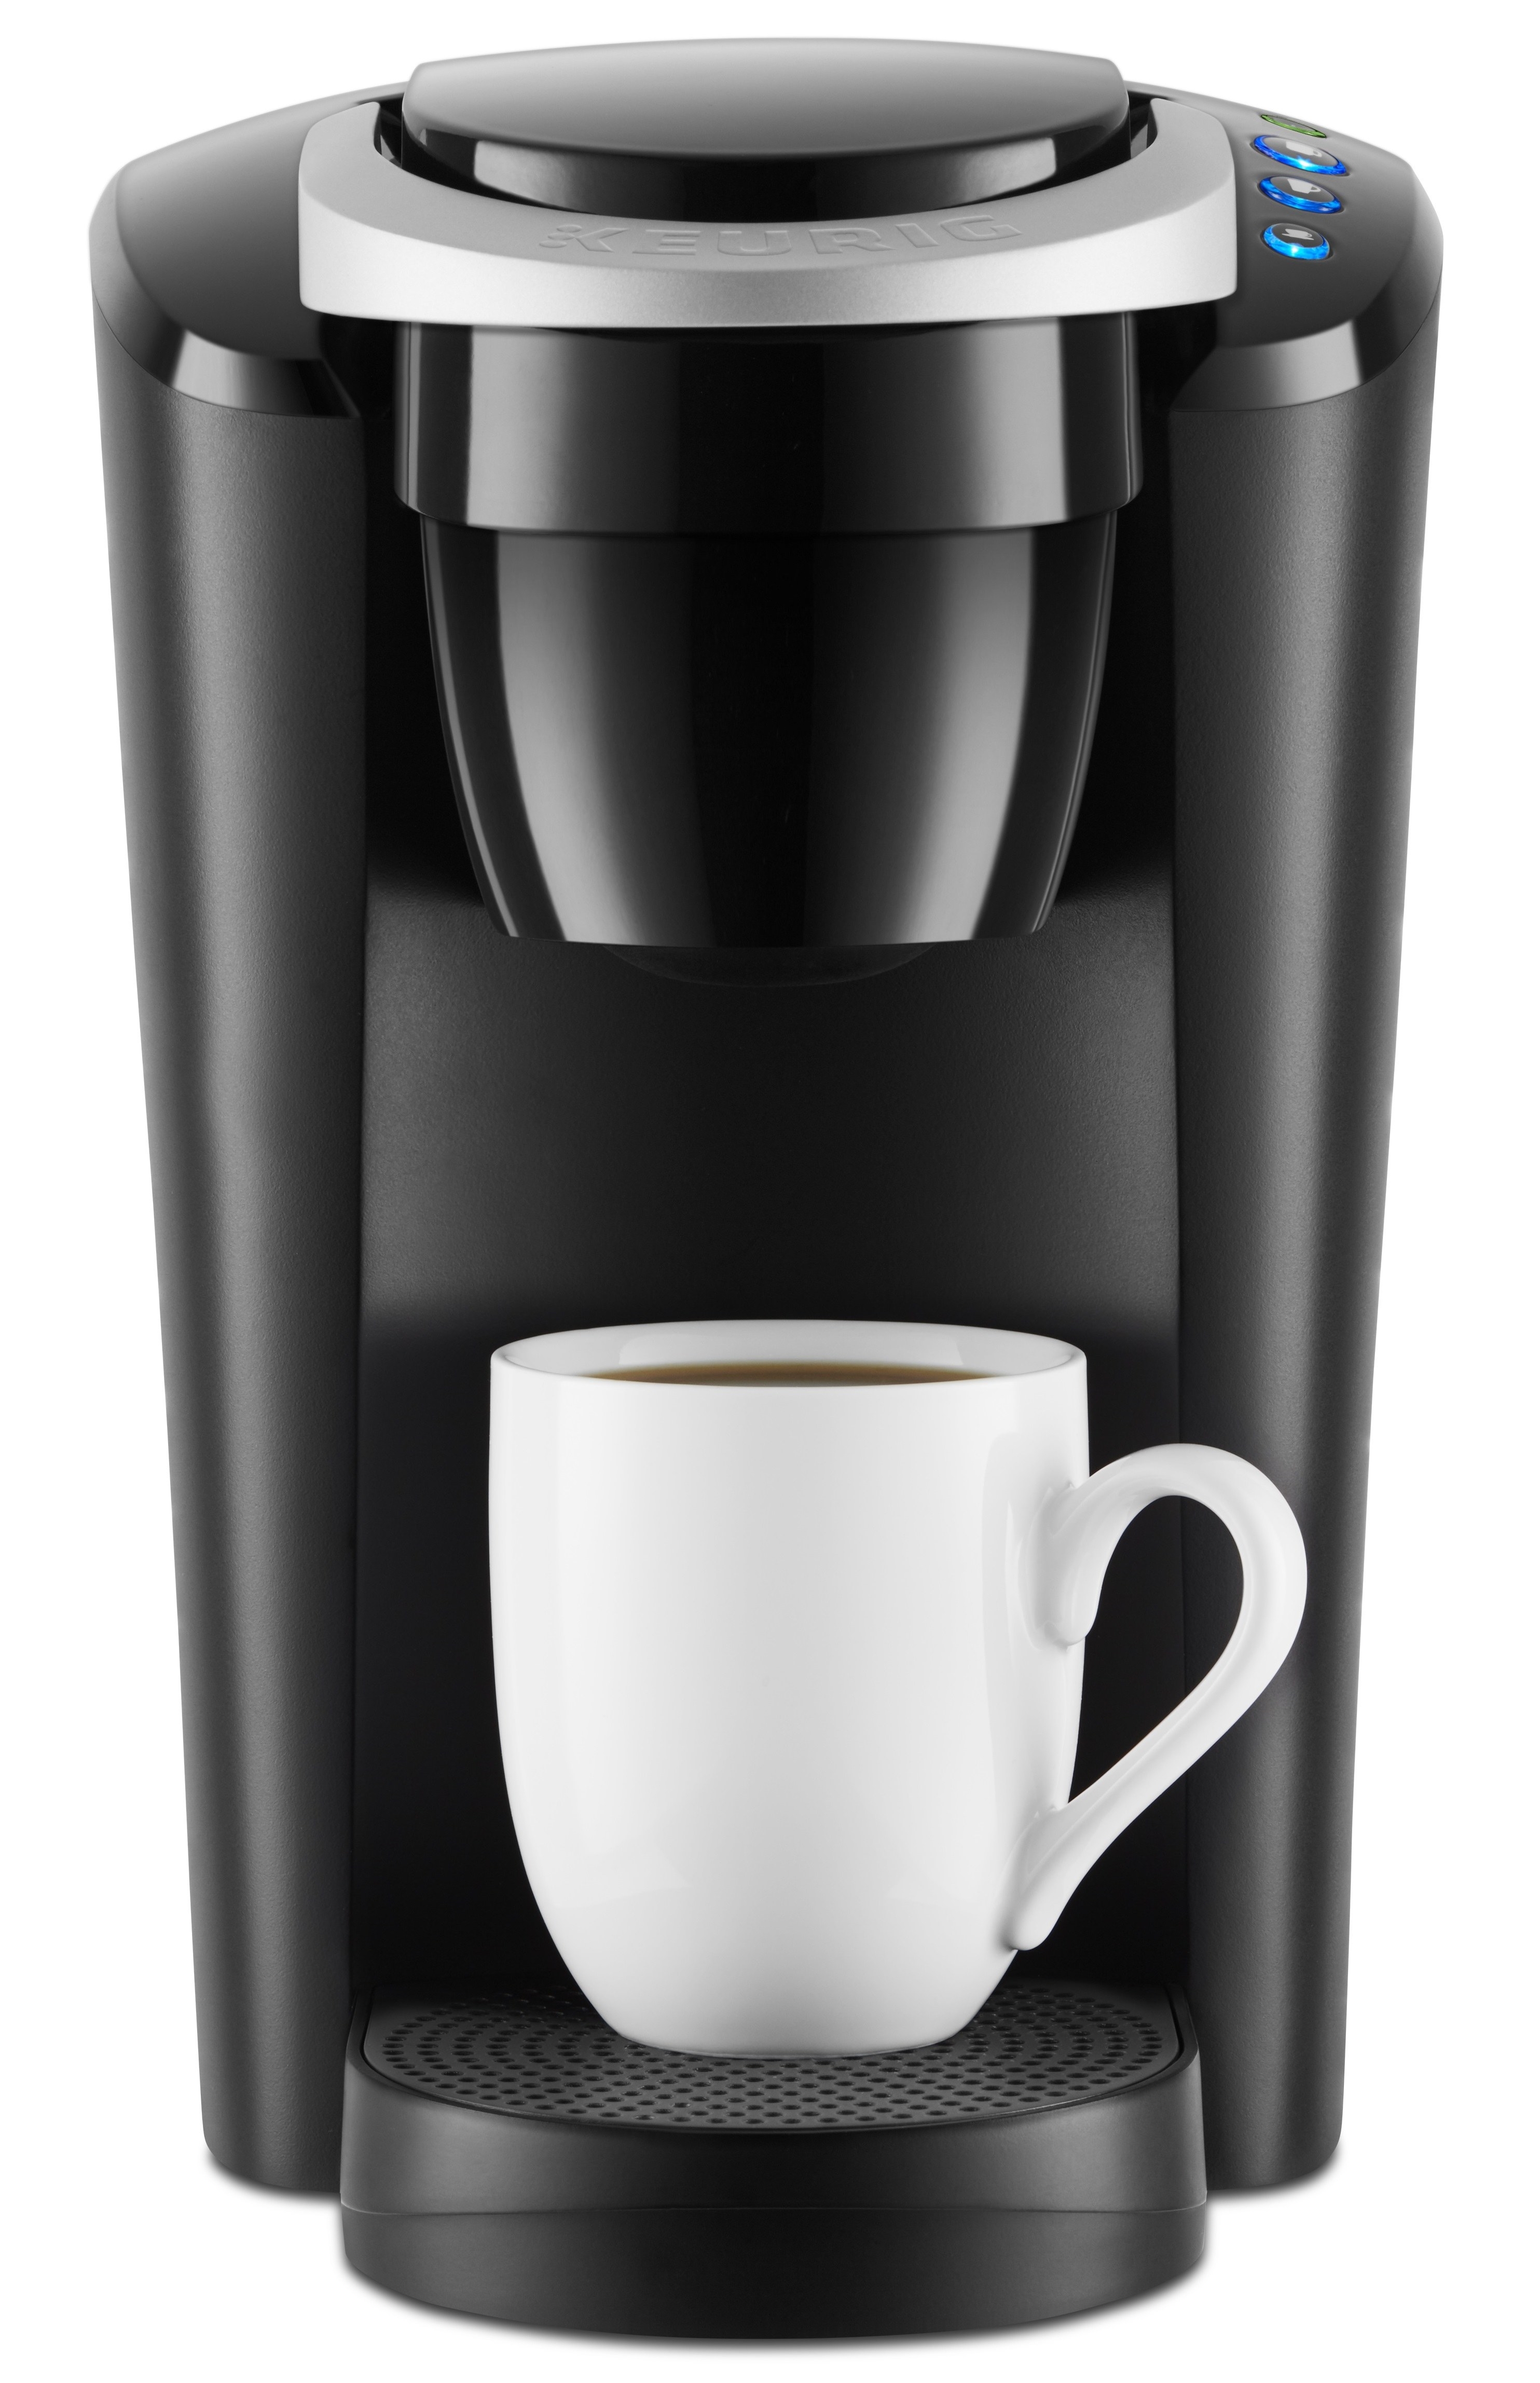 The coffeemaker in black with a white mug in it.